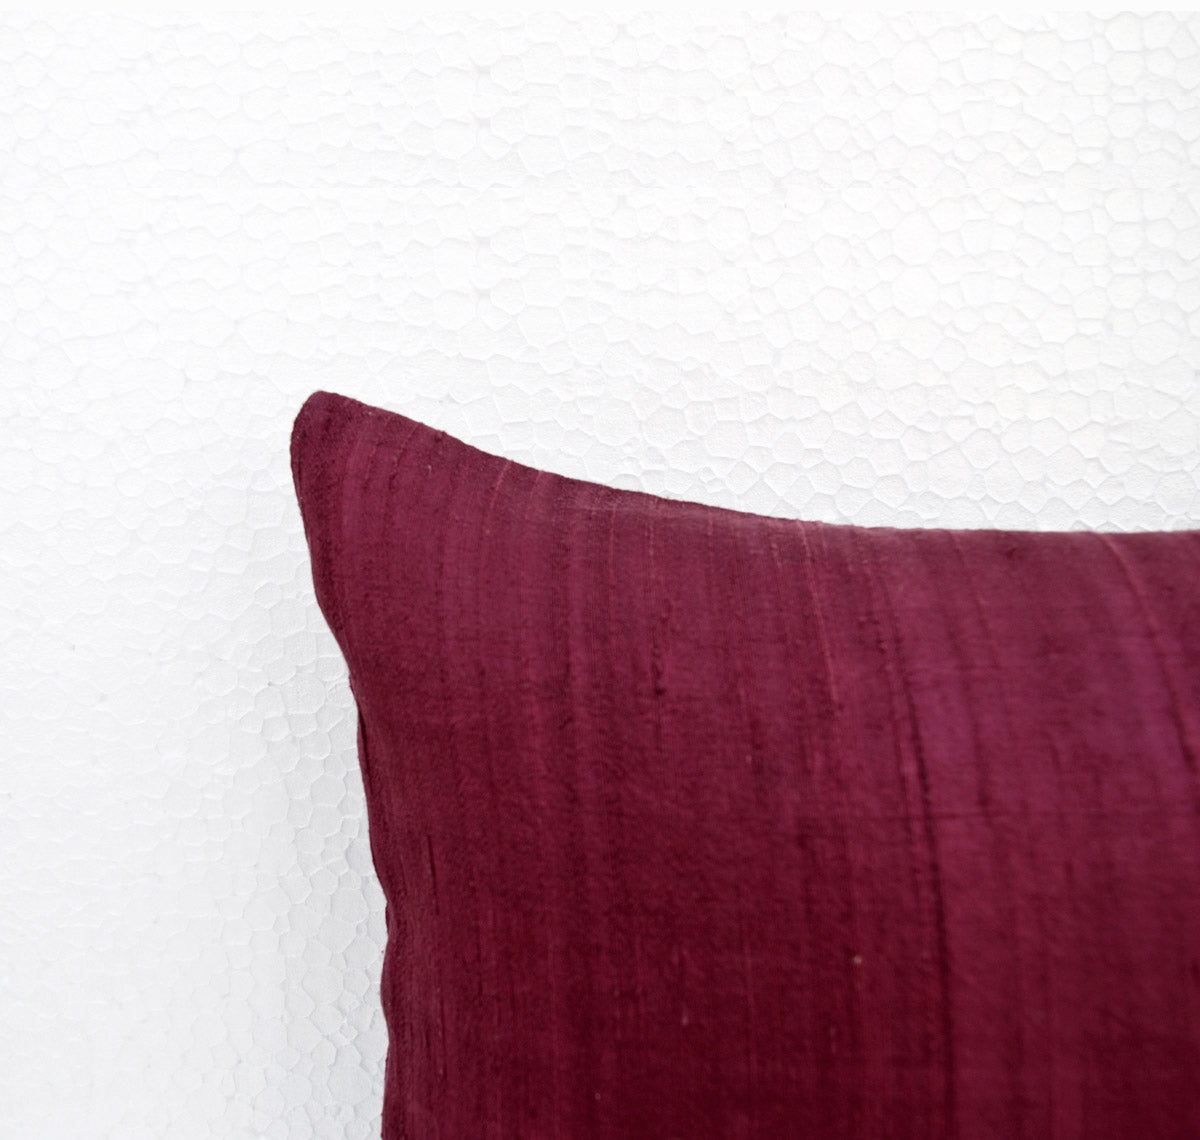 Maroon solid pure silk pillow cover, sizes available